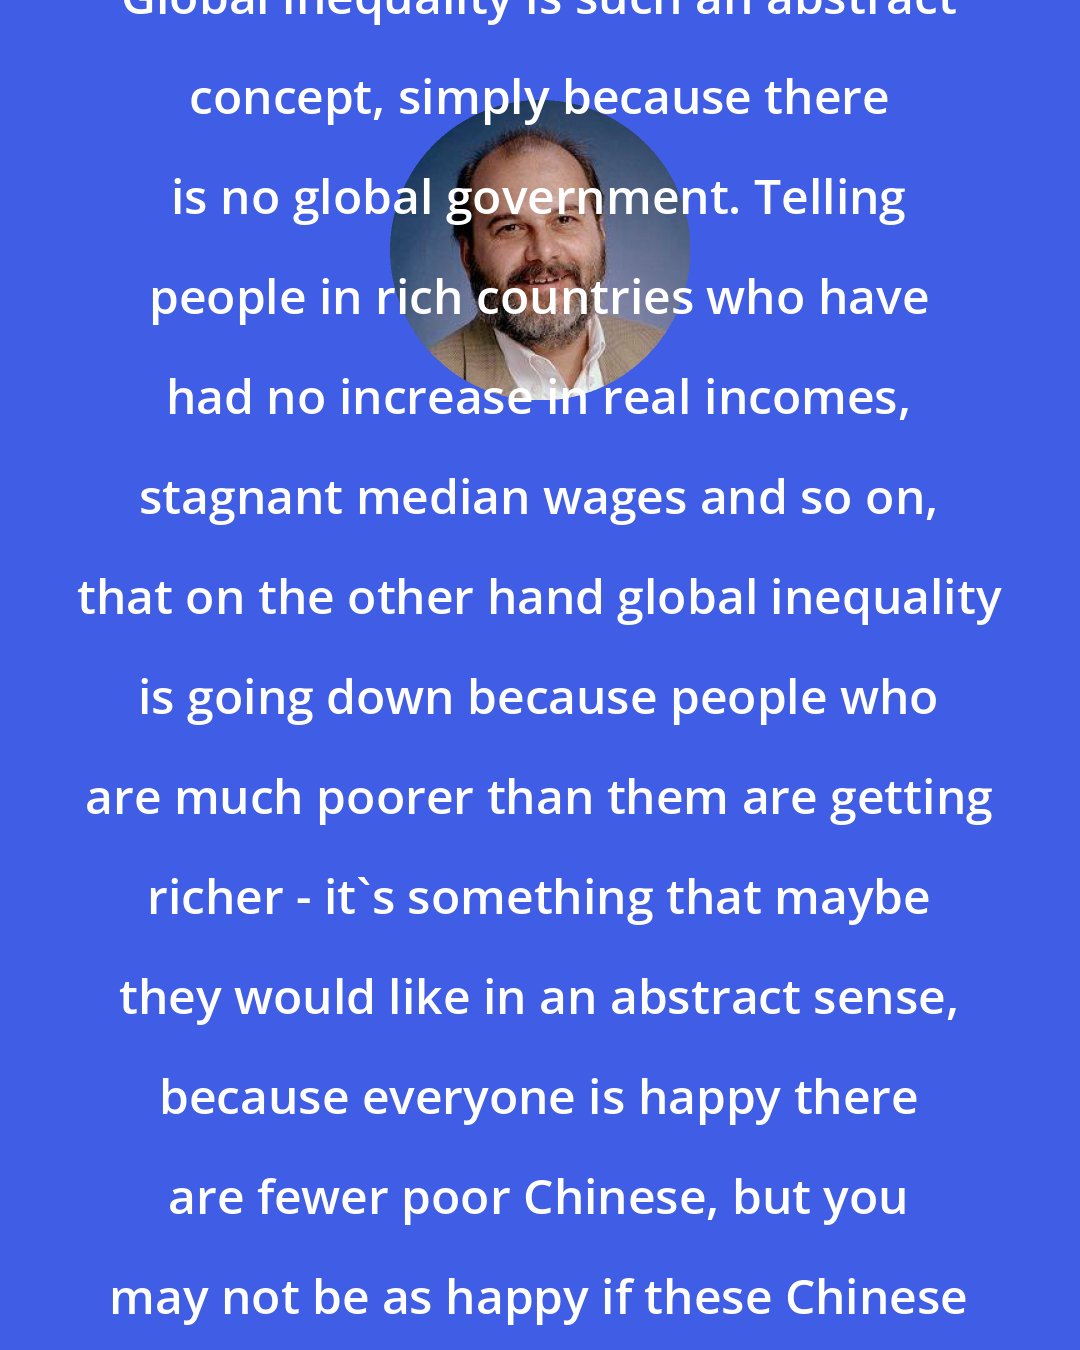 Branko Milanovic: Global inequality is such an abstract concept, simply because there is no global government. Telling people in rich countries who have had no increase in real incomes, stagnant median wages and so on, that on the other hand global inequality is going down because people who are much poorer than them are getting richer - it's something that maybe they would like in an abstract sense, because everyone is happy there are fewer poor Chinese, but you may not be as happy if these Chinese are taking your job.